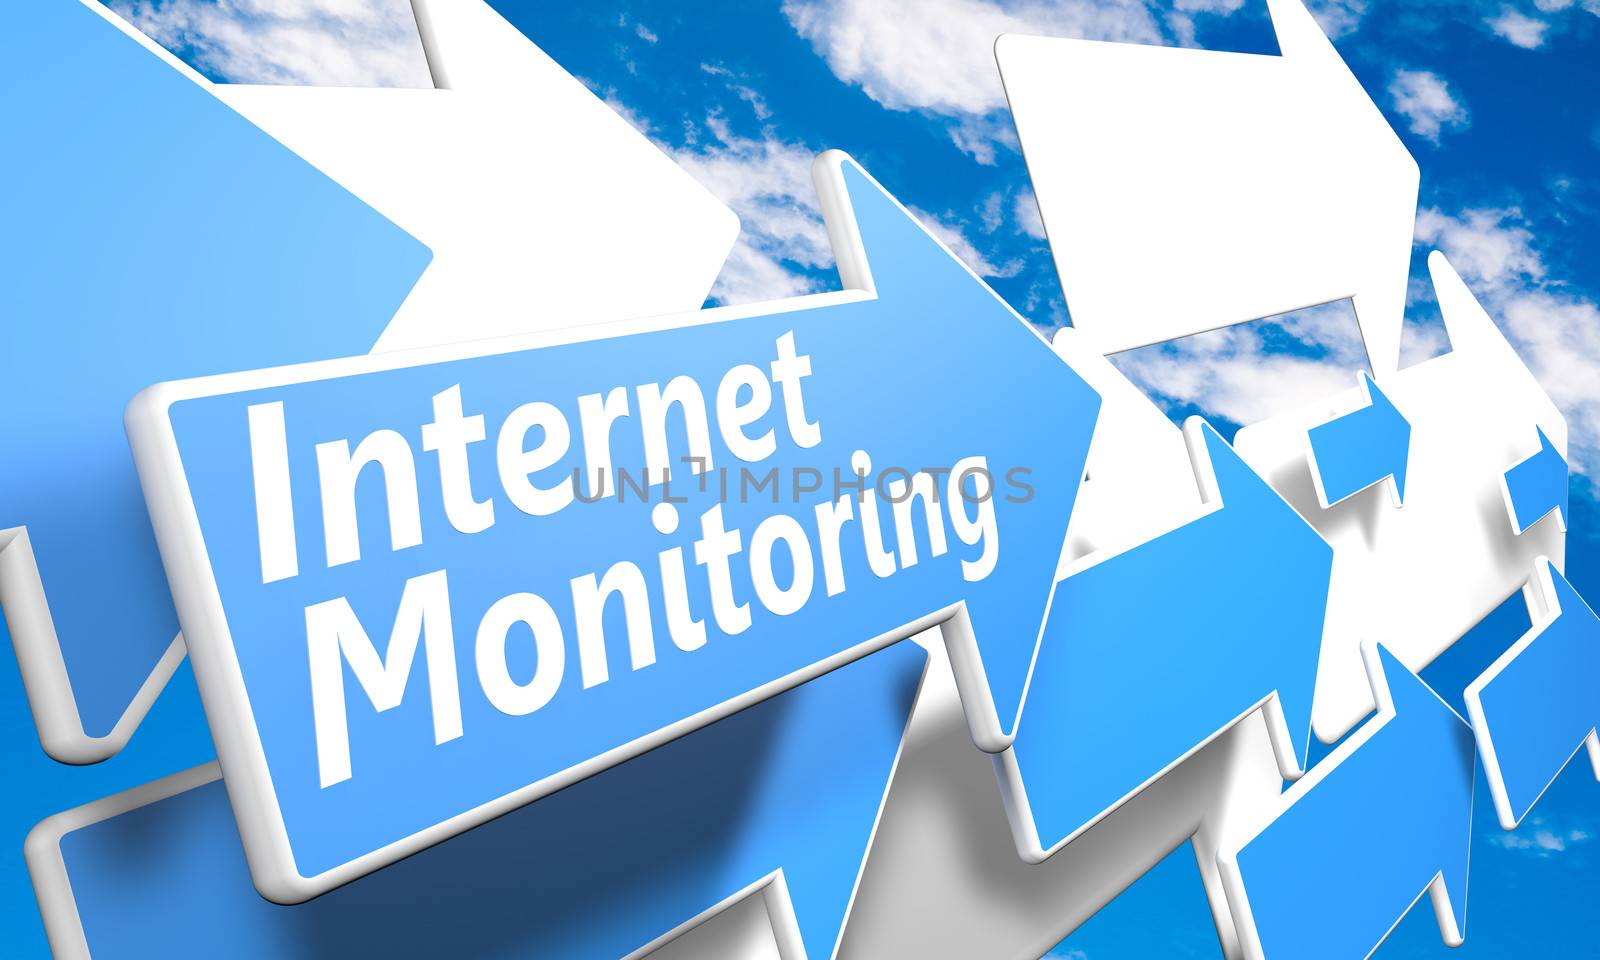 Internet Monitoring 3d render concept with blue and white arrows flying in a blue sky with clouds